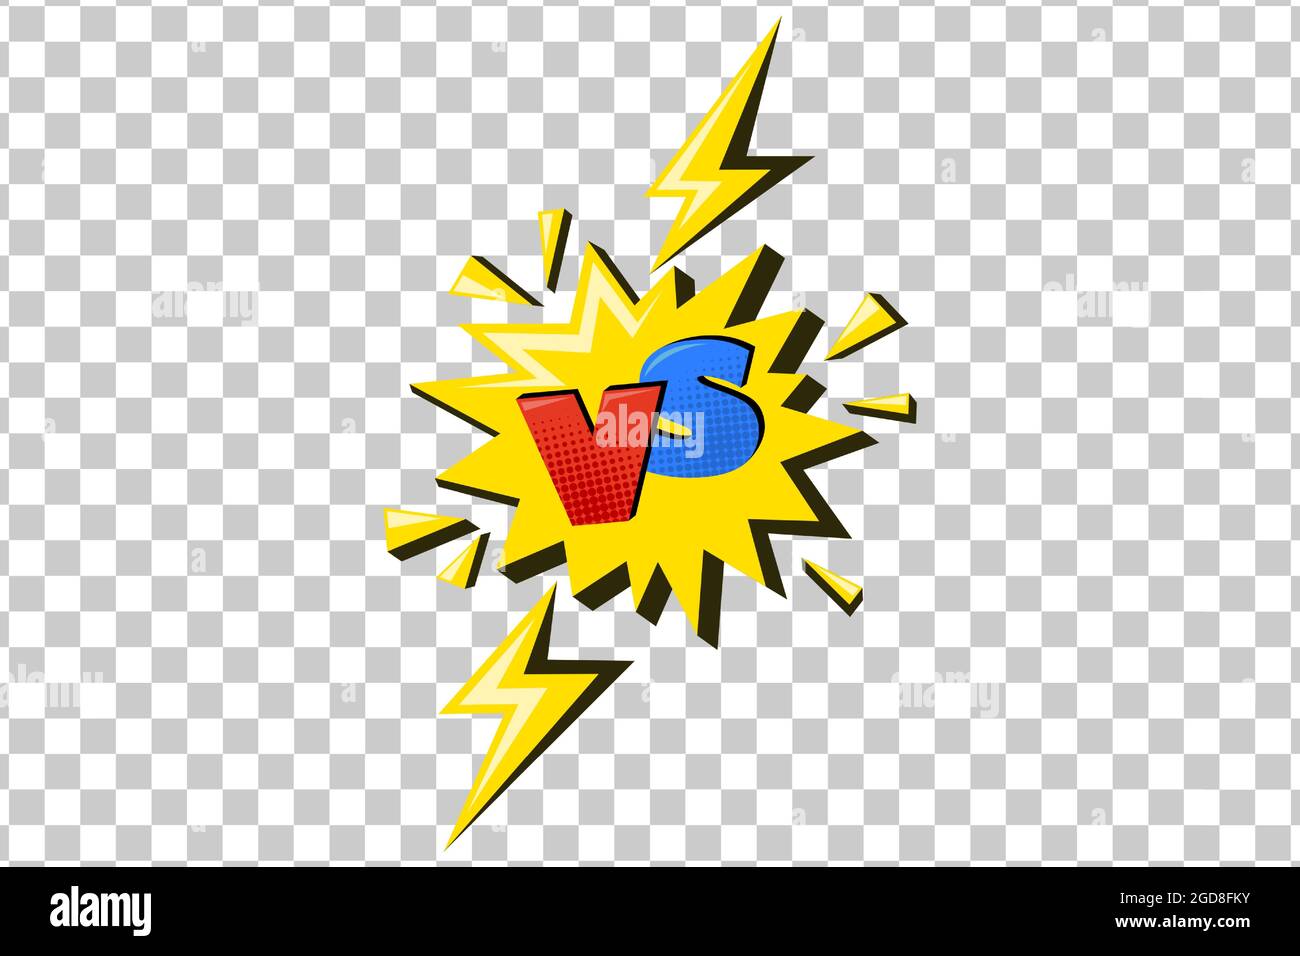 Versus comic design with lightning. Yellow flash with vs symbol. Vector illustration isolated in transparent background Stock Vector